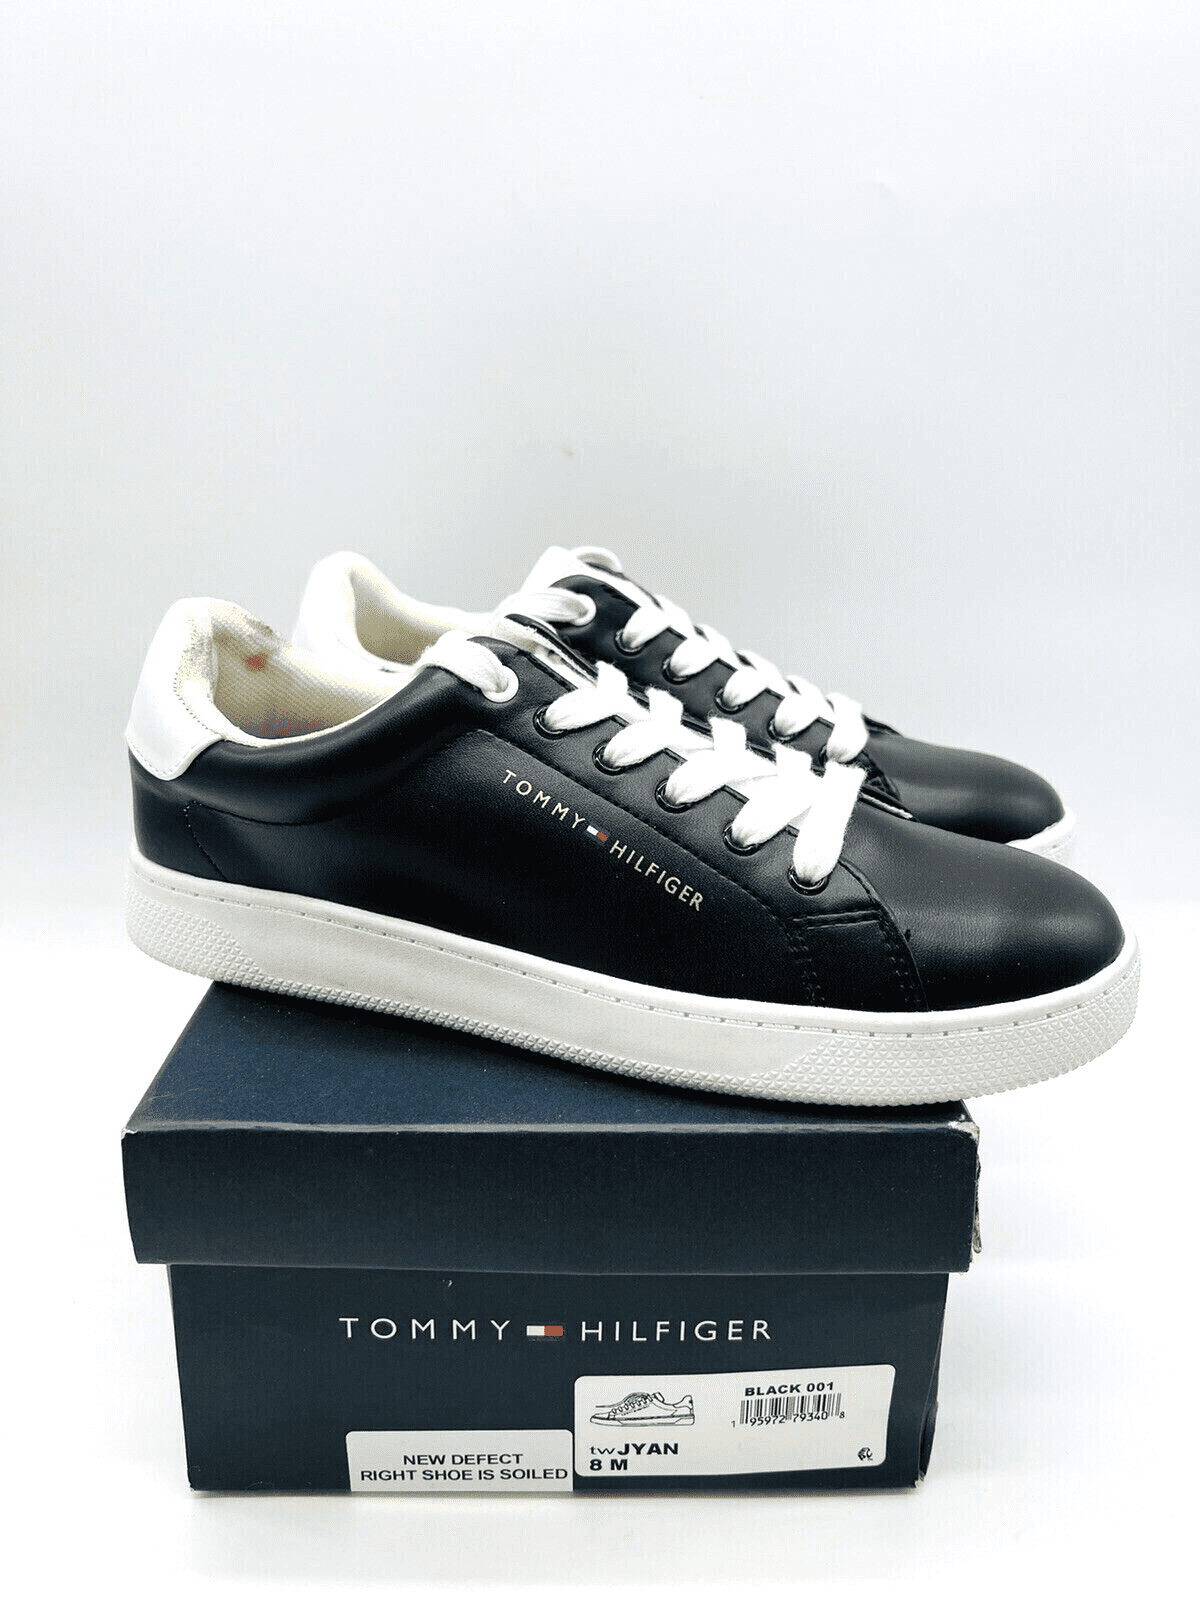 Tommy Hilfiger Lace-Up Casual Sneakers Black 8M - Walmart.com